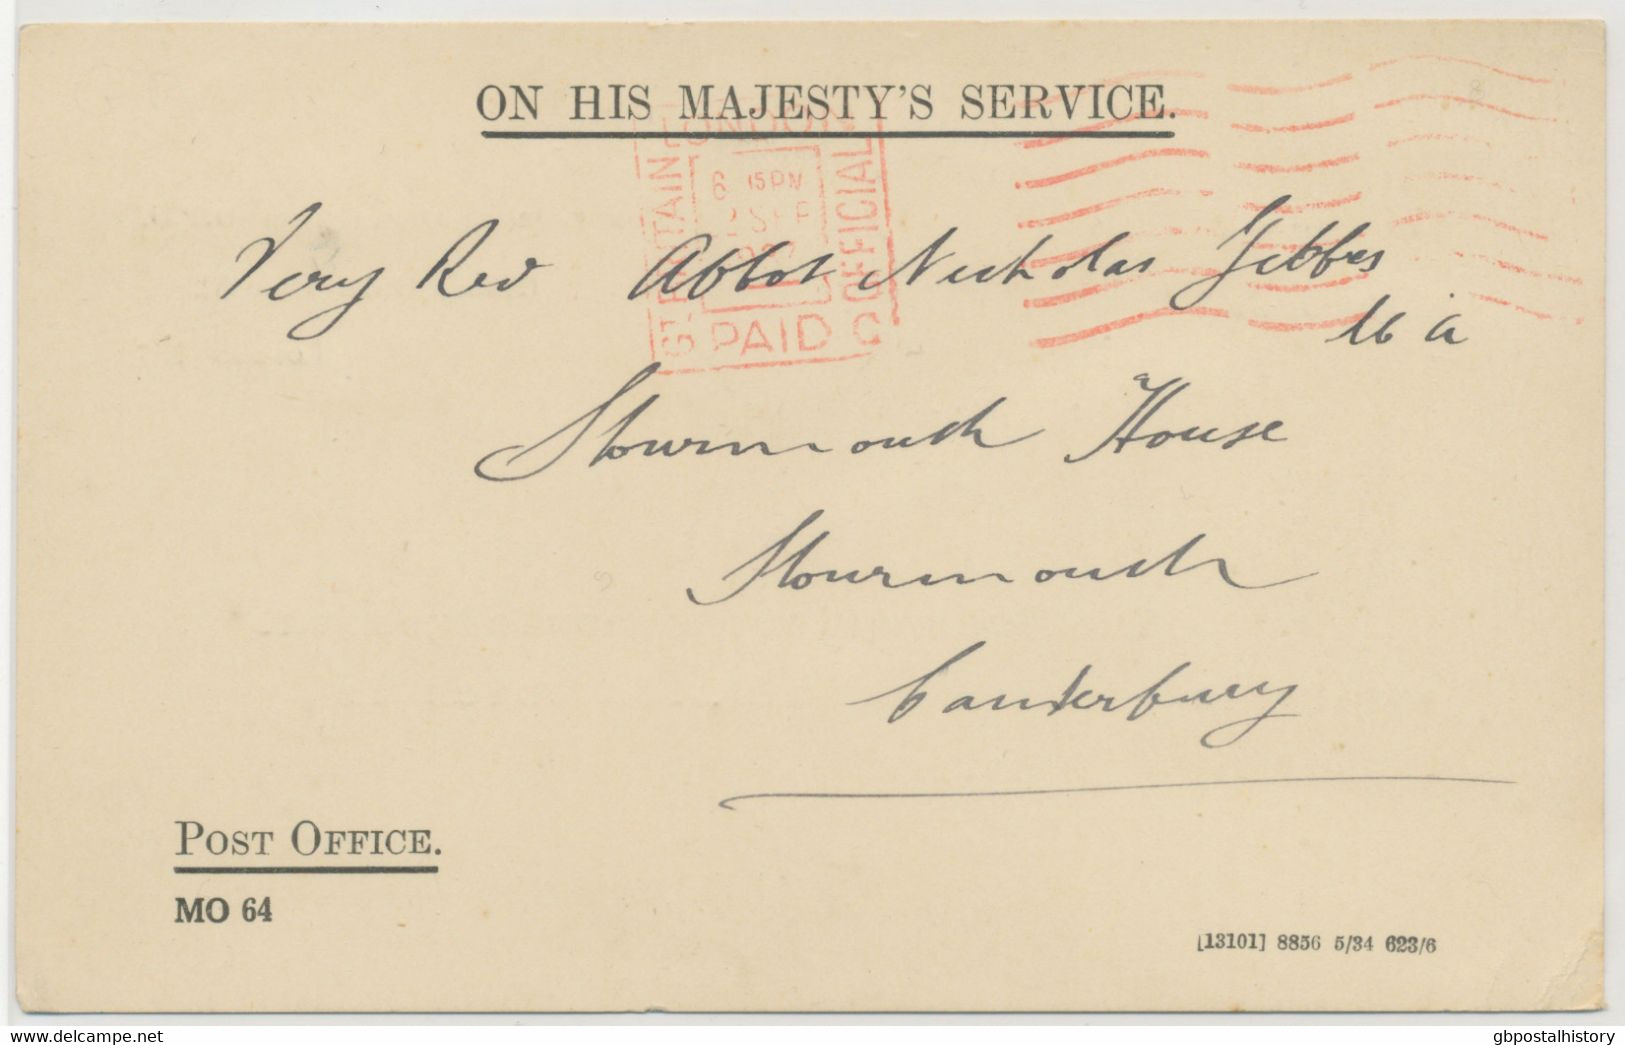 GB MONEY ORDER OFFICE 1847 Printed Matter of the GENERAL POST-OFFICE - Remittance Letter of Acknowledgment to Postmaster